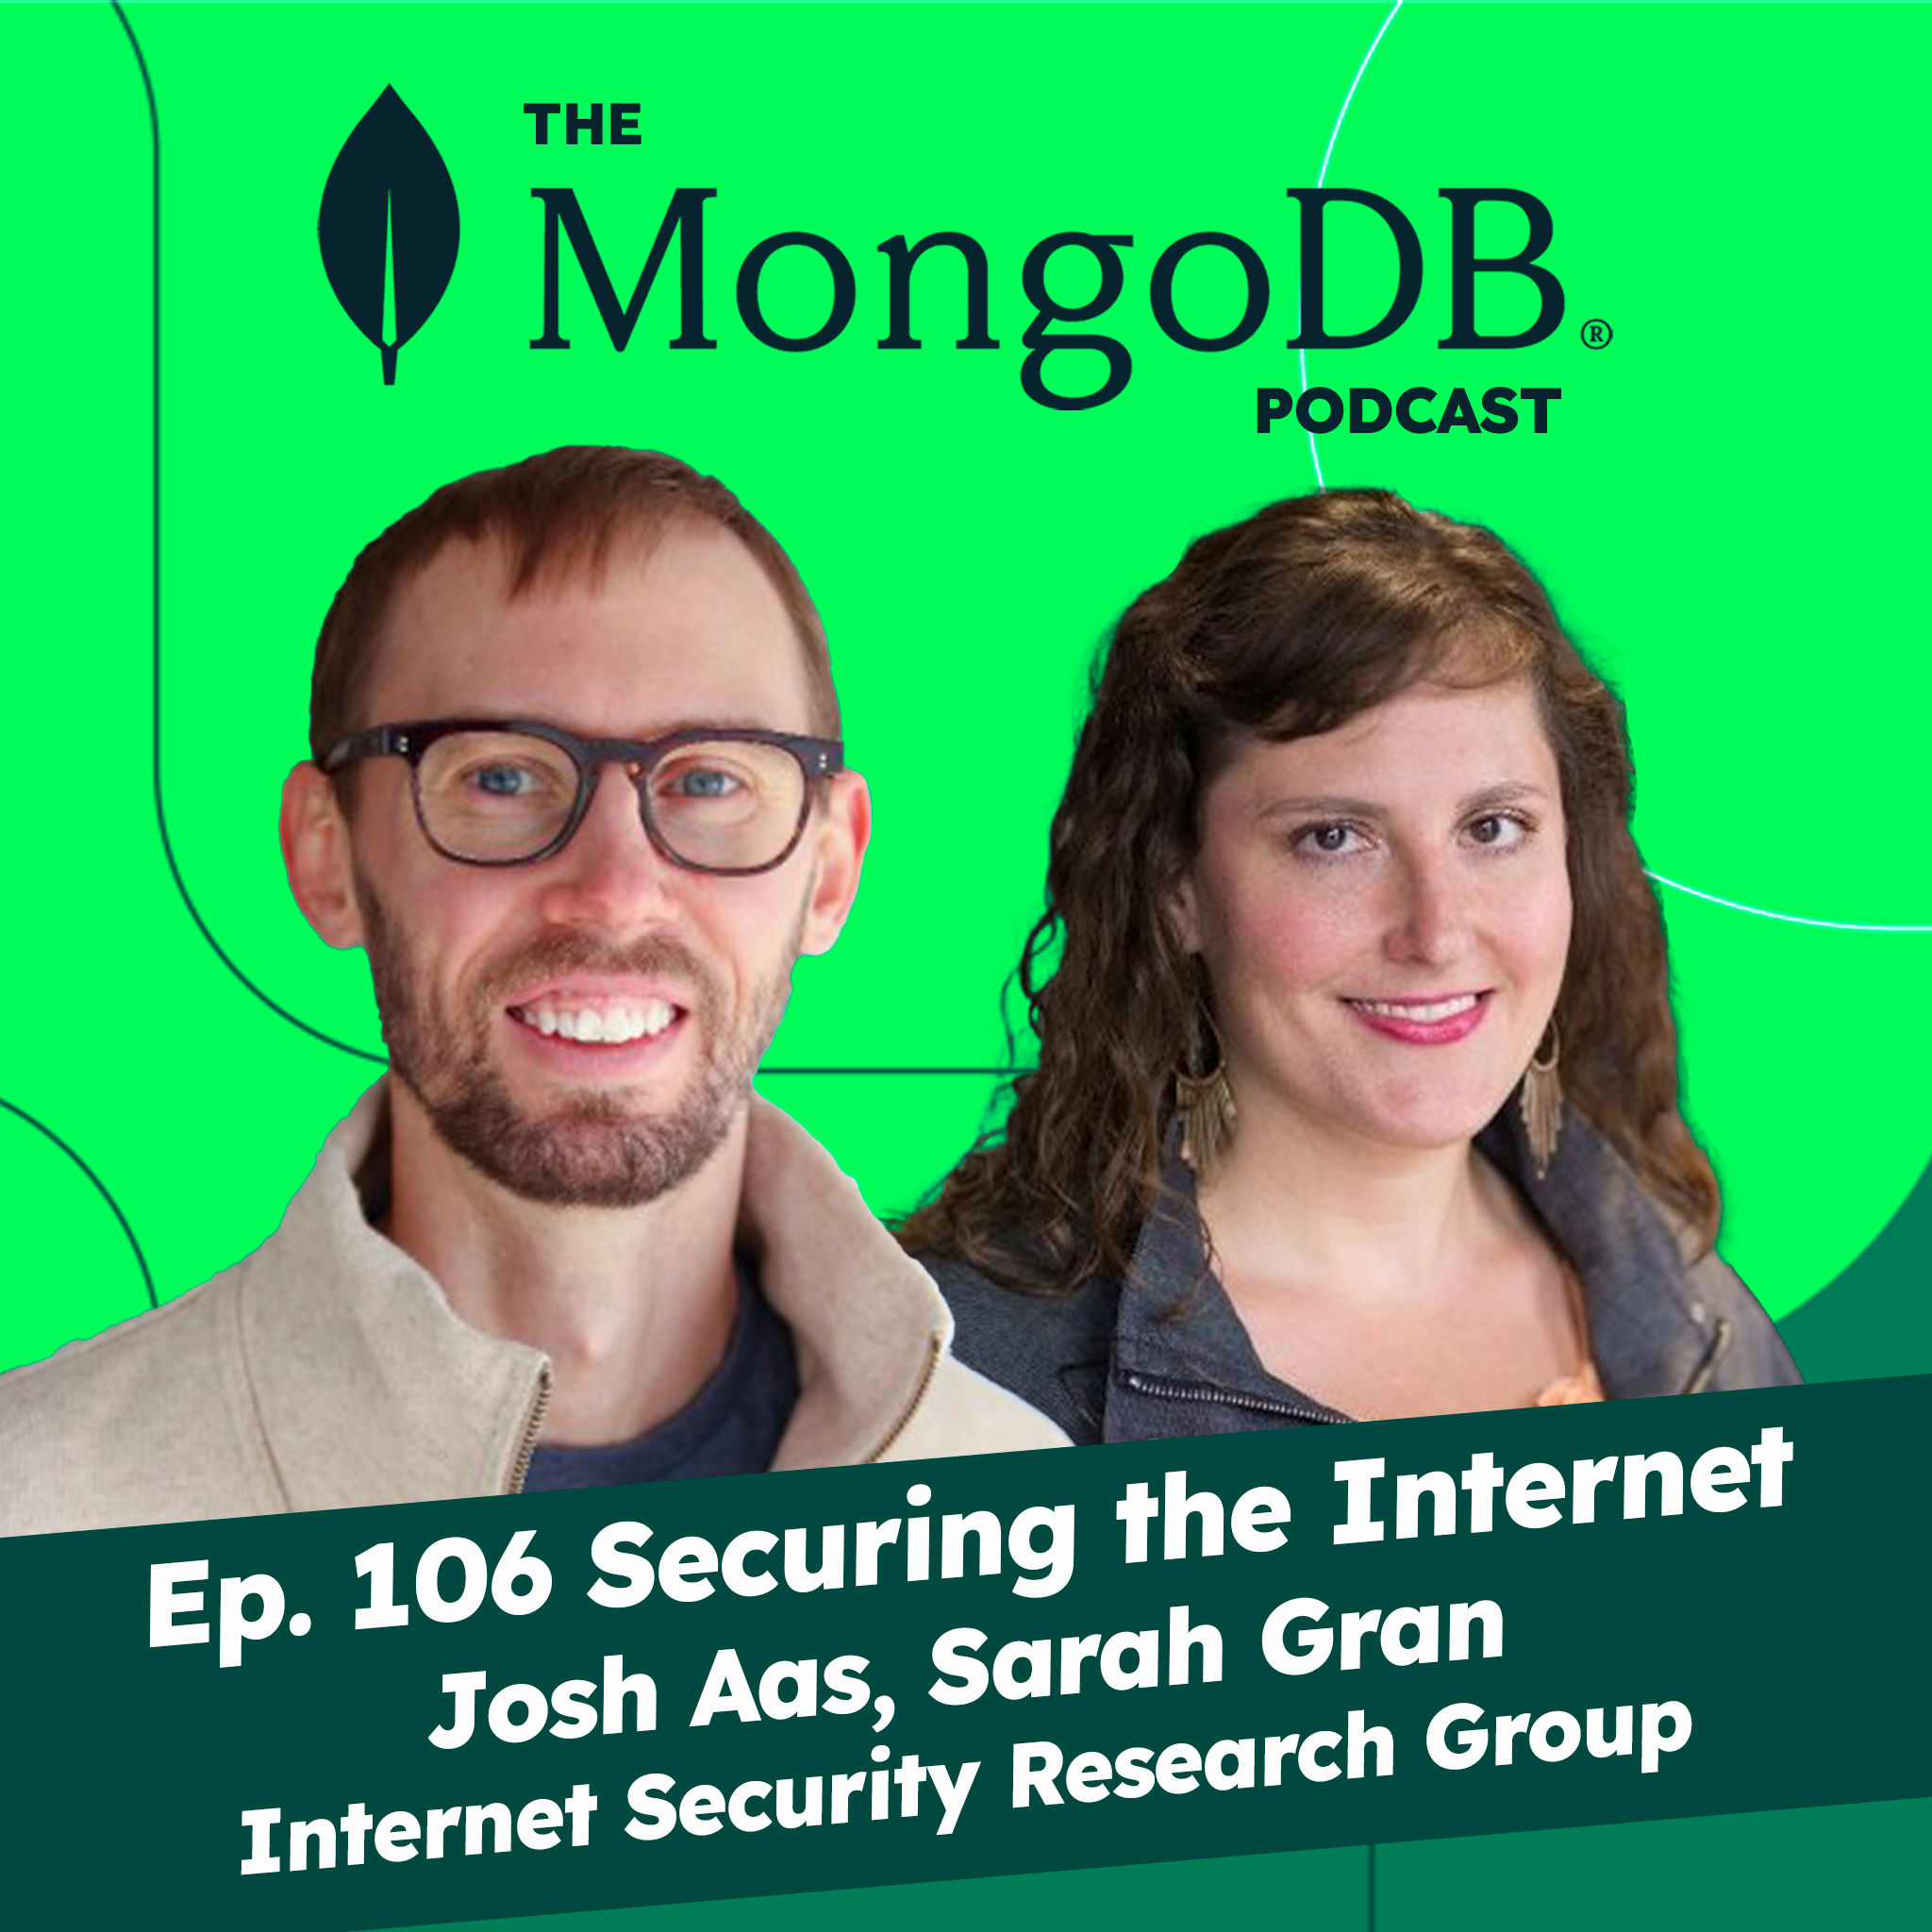 Ep. 106 Securing the Internet with Josh Aas, Sarah Gran of ISRG